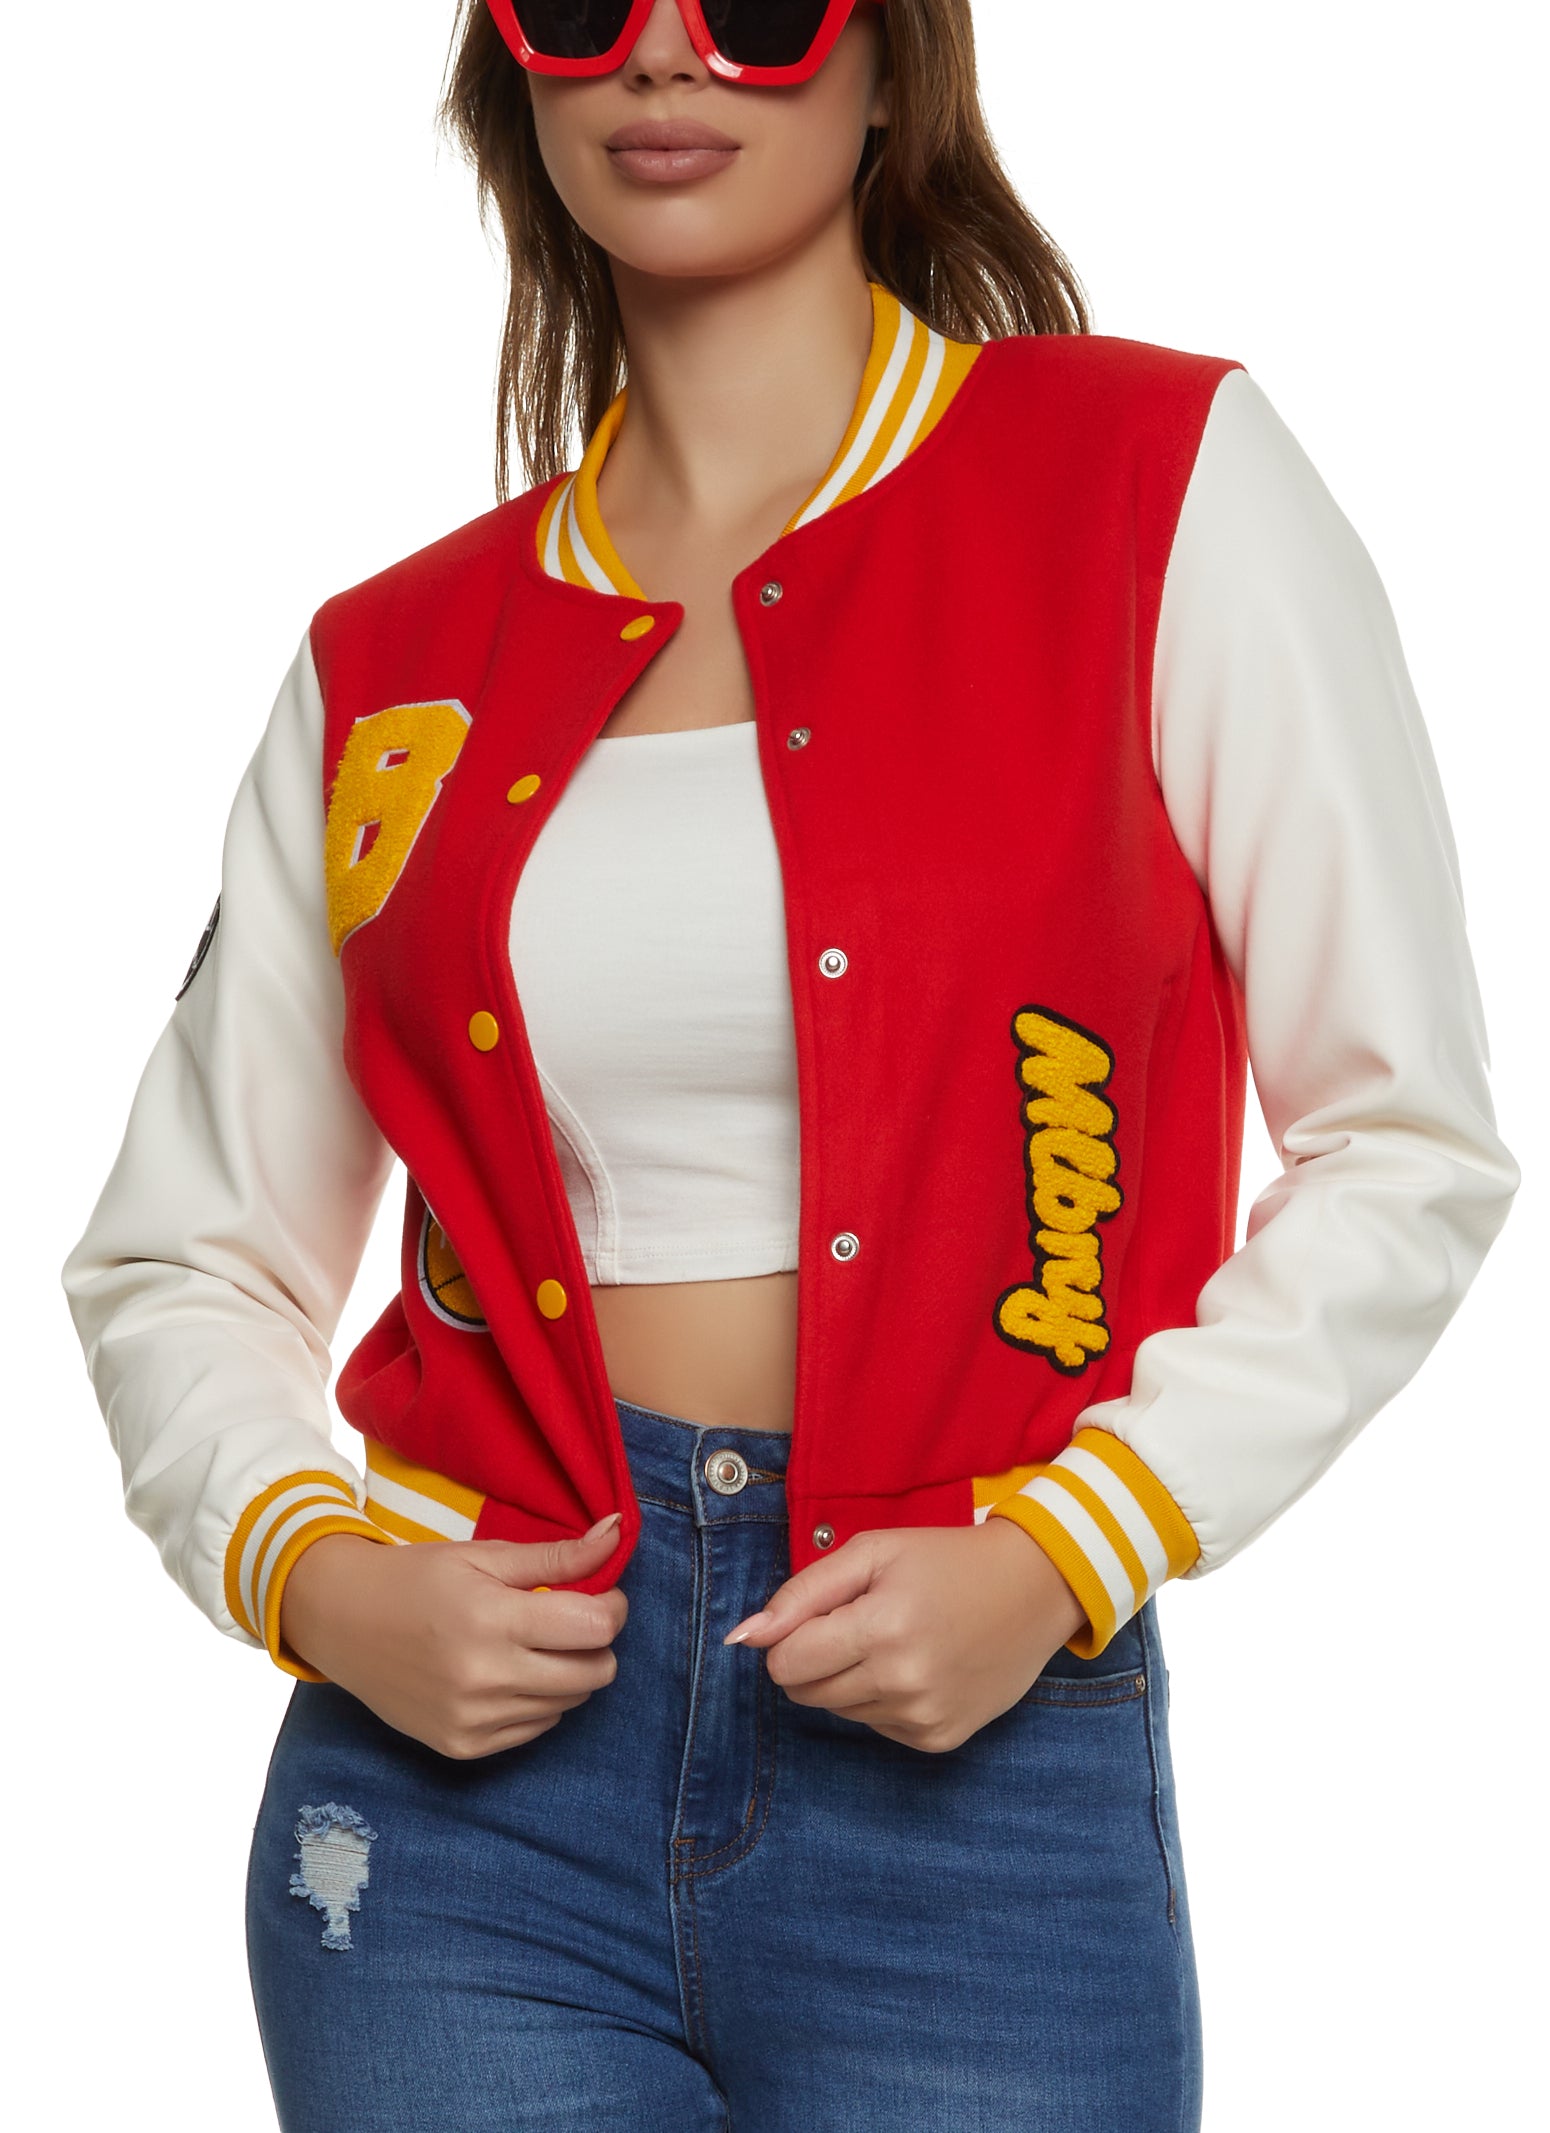 Women's Red Letterman Jacket with White Sleeves - College Varsity Jacket  *Ends Soon*